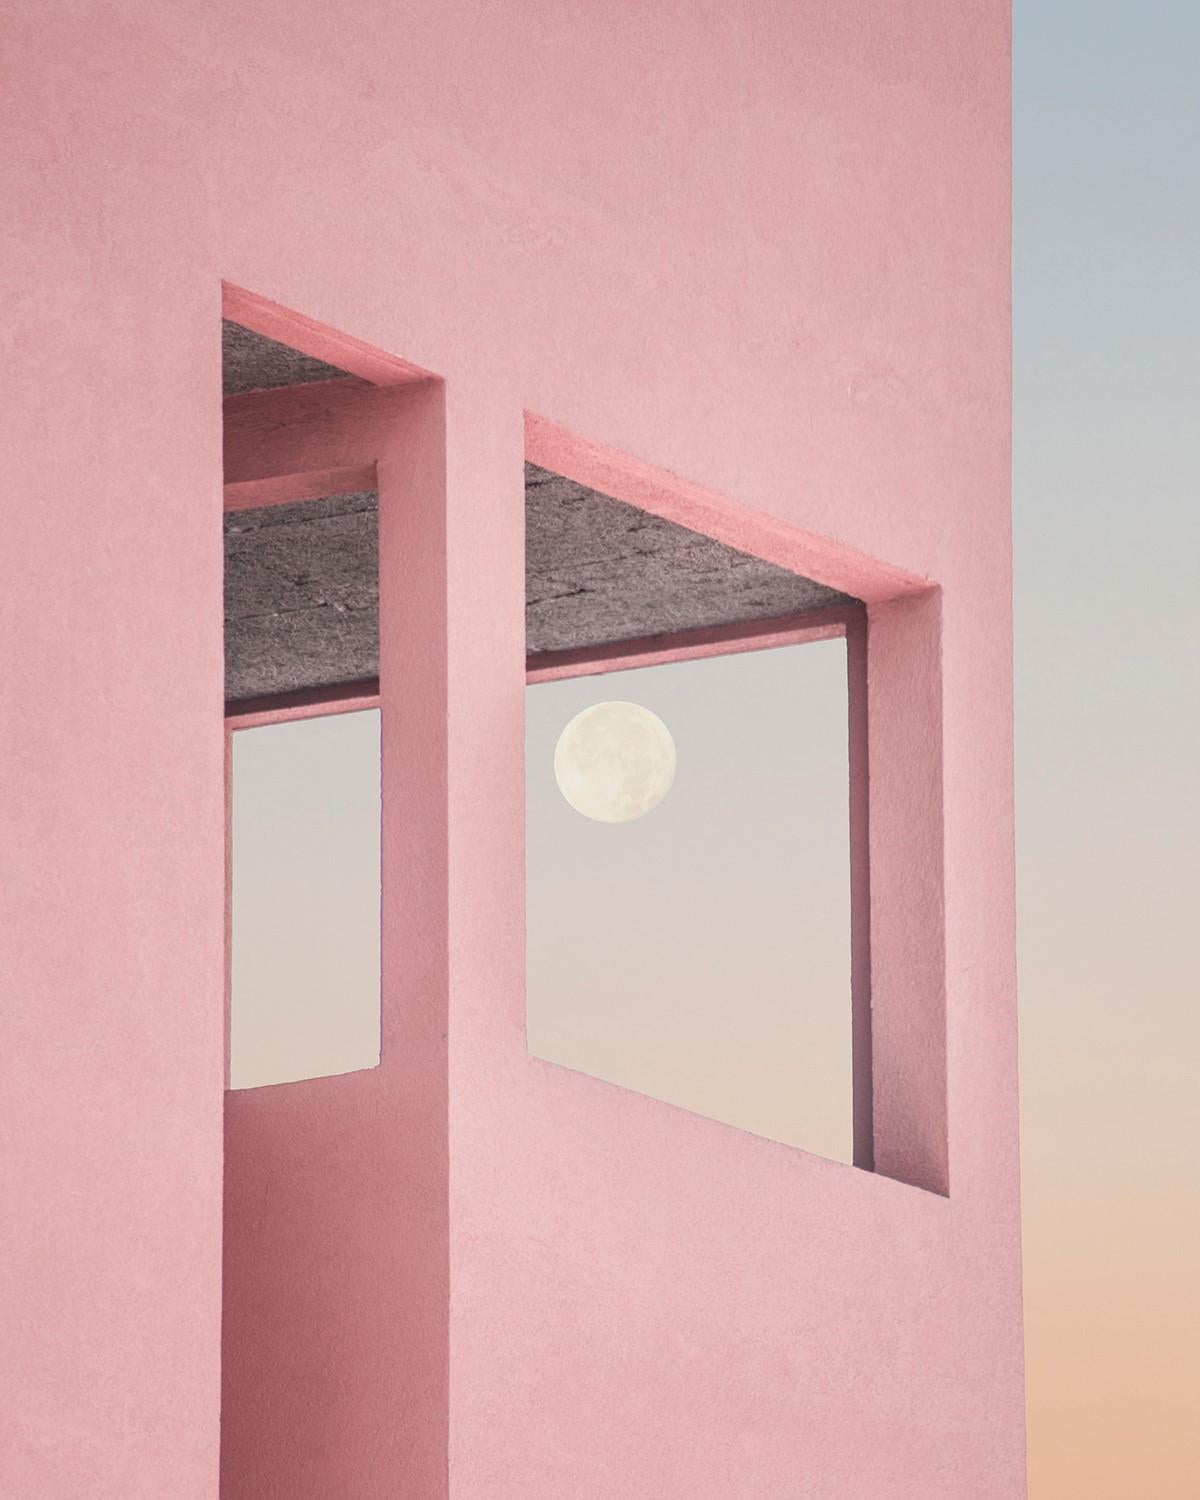 This work represents a beautiful view a pink building with a full moon in it. It is a celebration of love, tenderness and passion between two beings. It could therefore be the ideal romantic gift to express your feelings to your loved one on